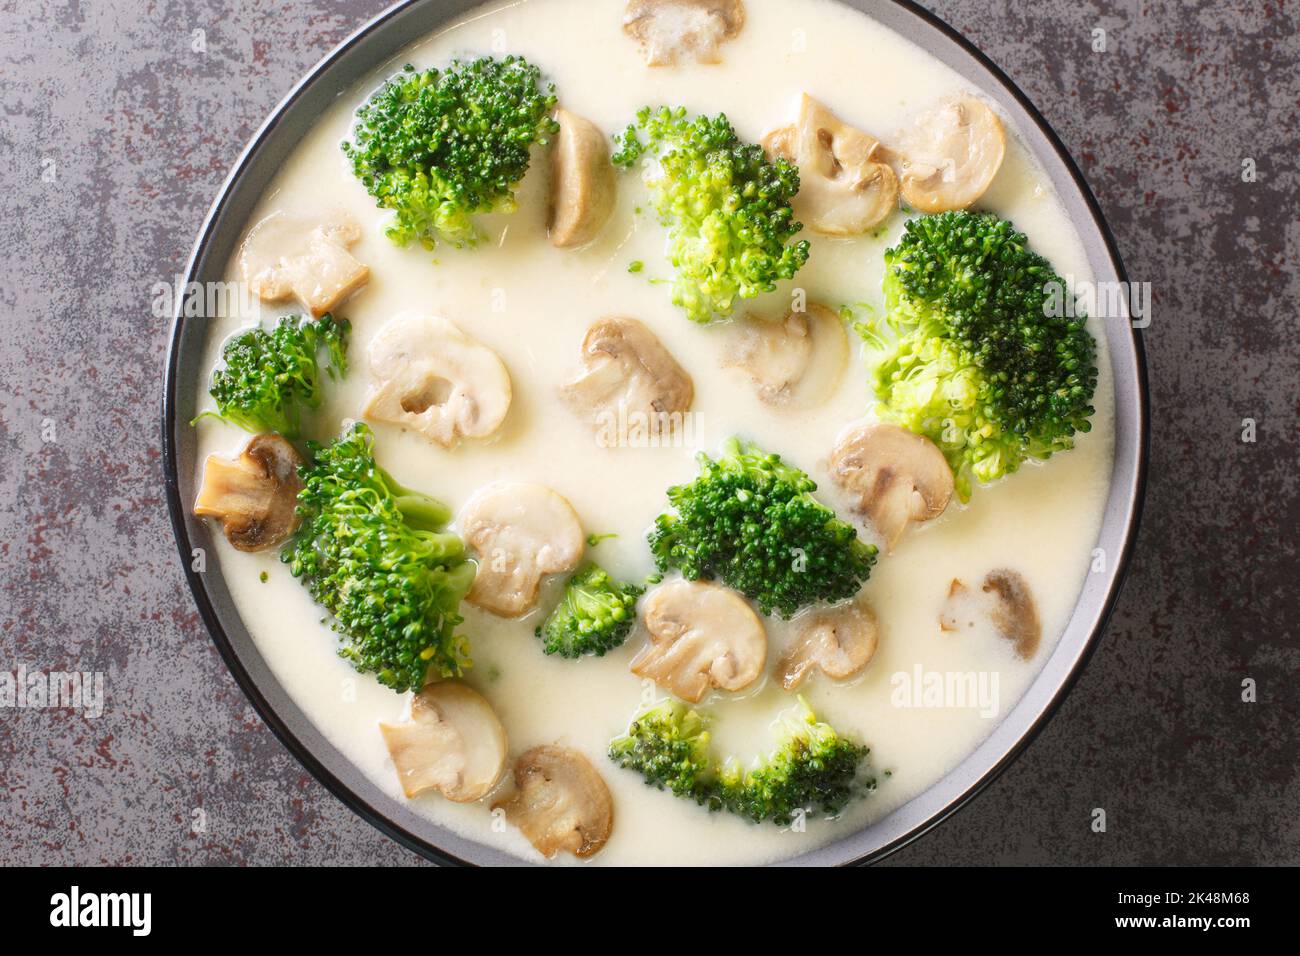 Tasty Mushroom Cheese Broccoli Soup close-up in the bowl on the table. Horizontal top view from above Stock Photo